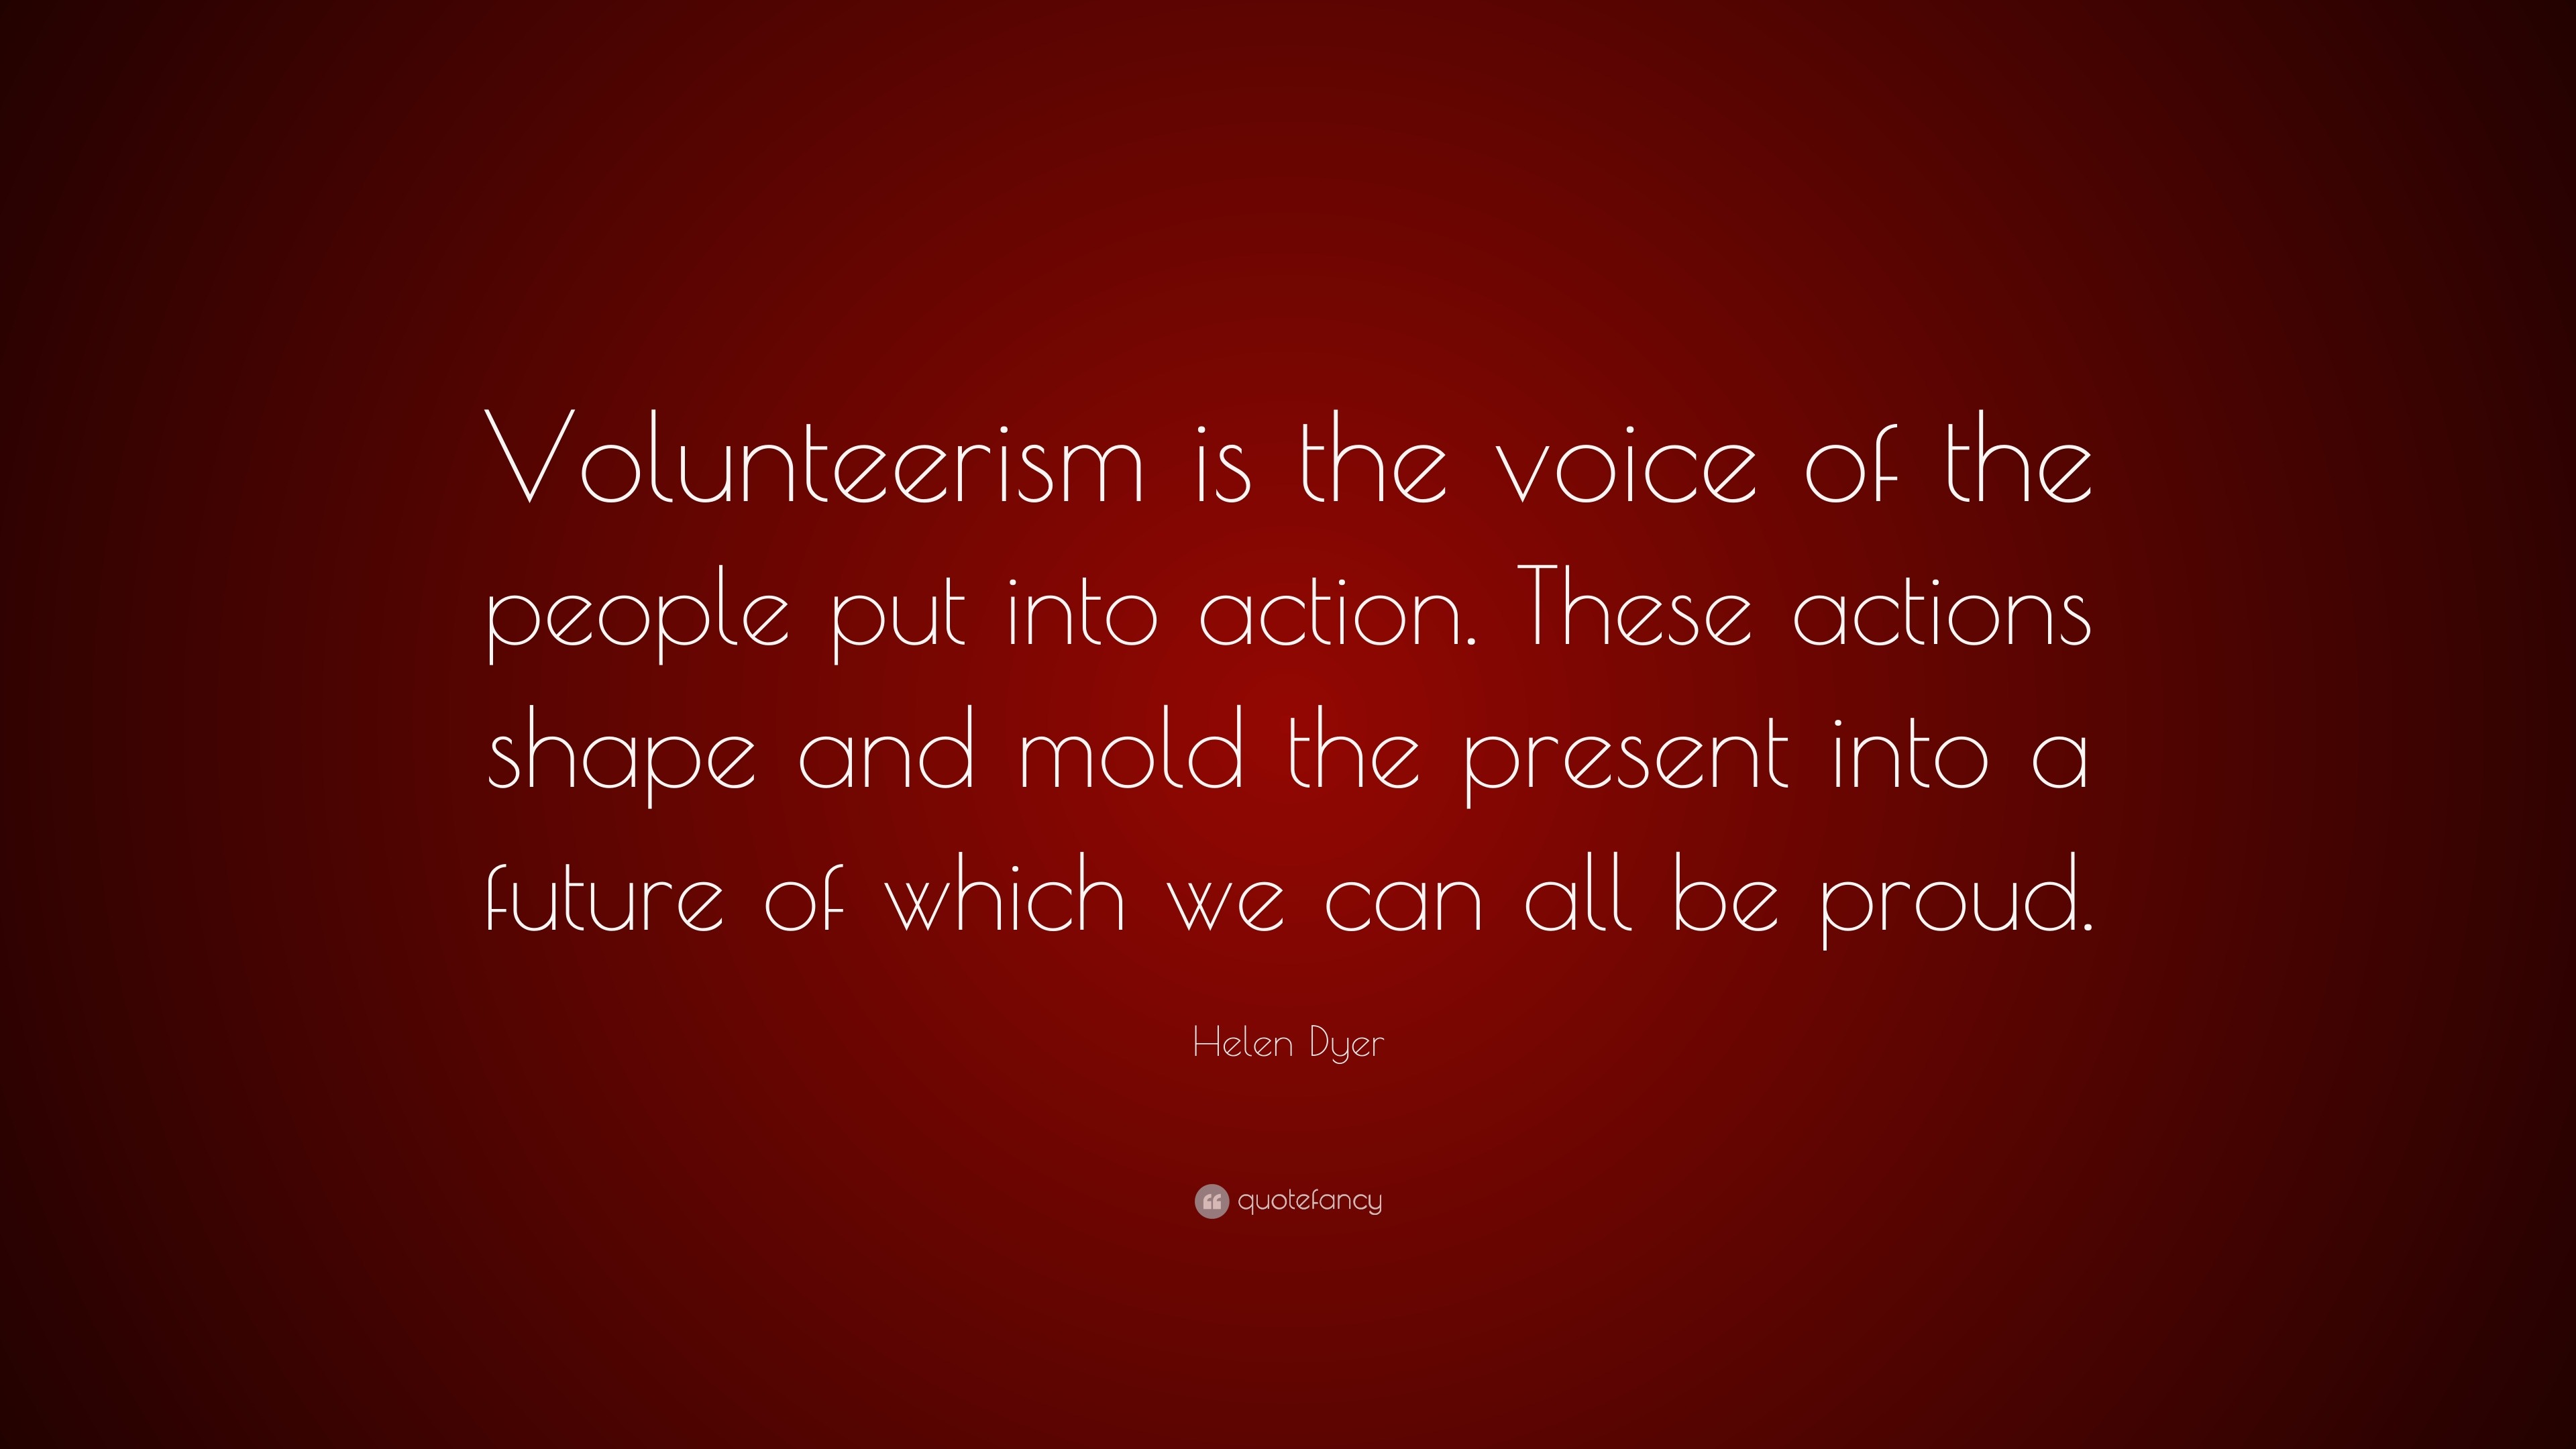 Helen Dyer Quote “Volunteerism is the voice of the people